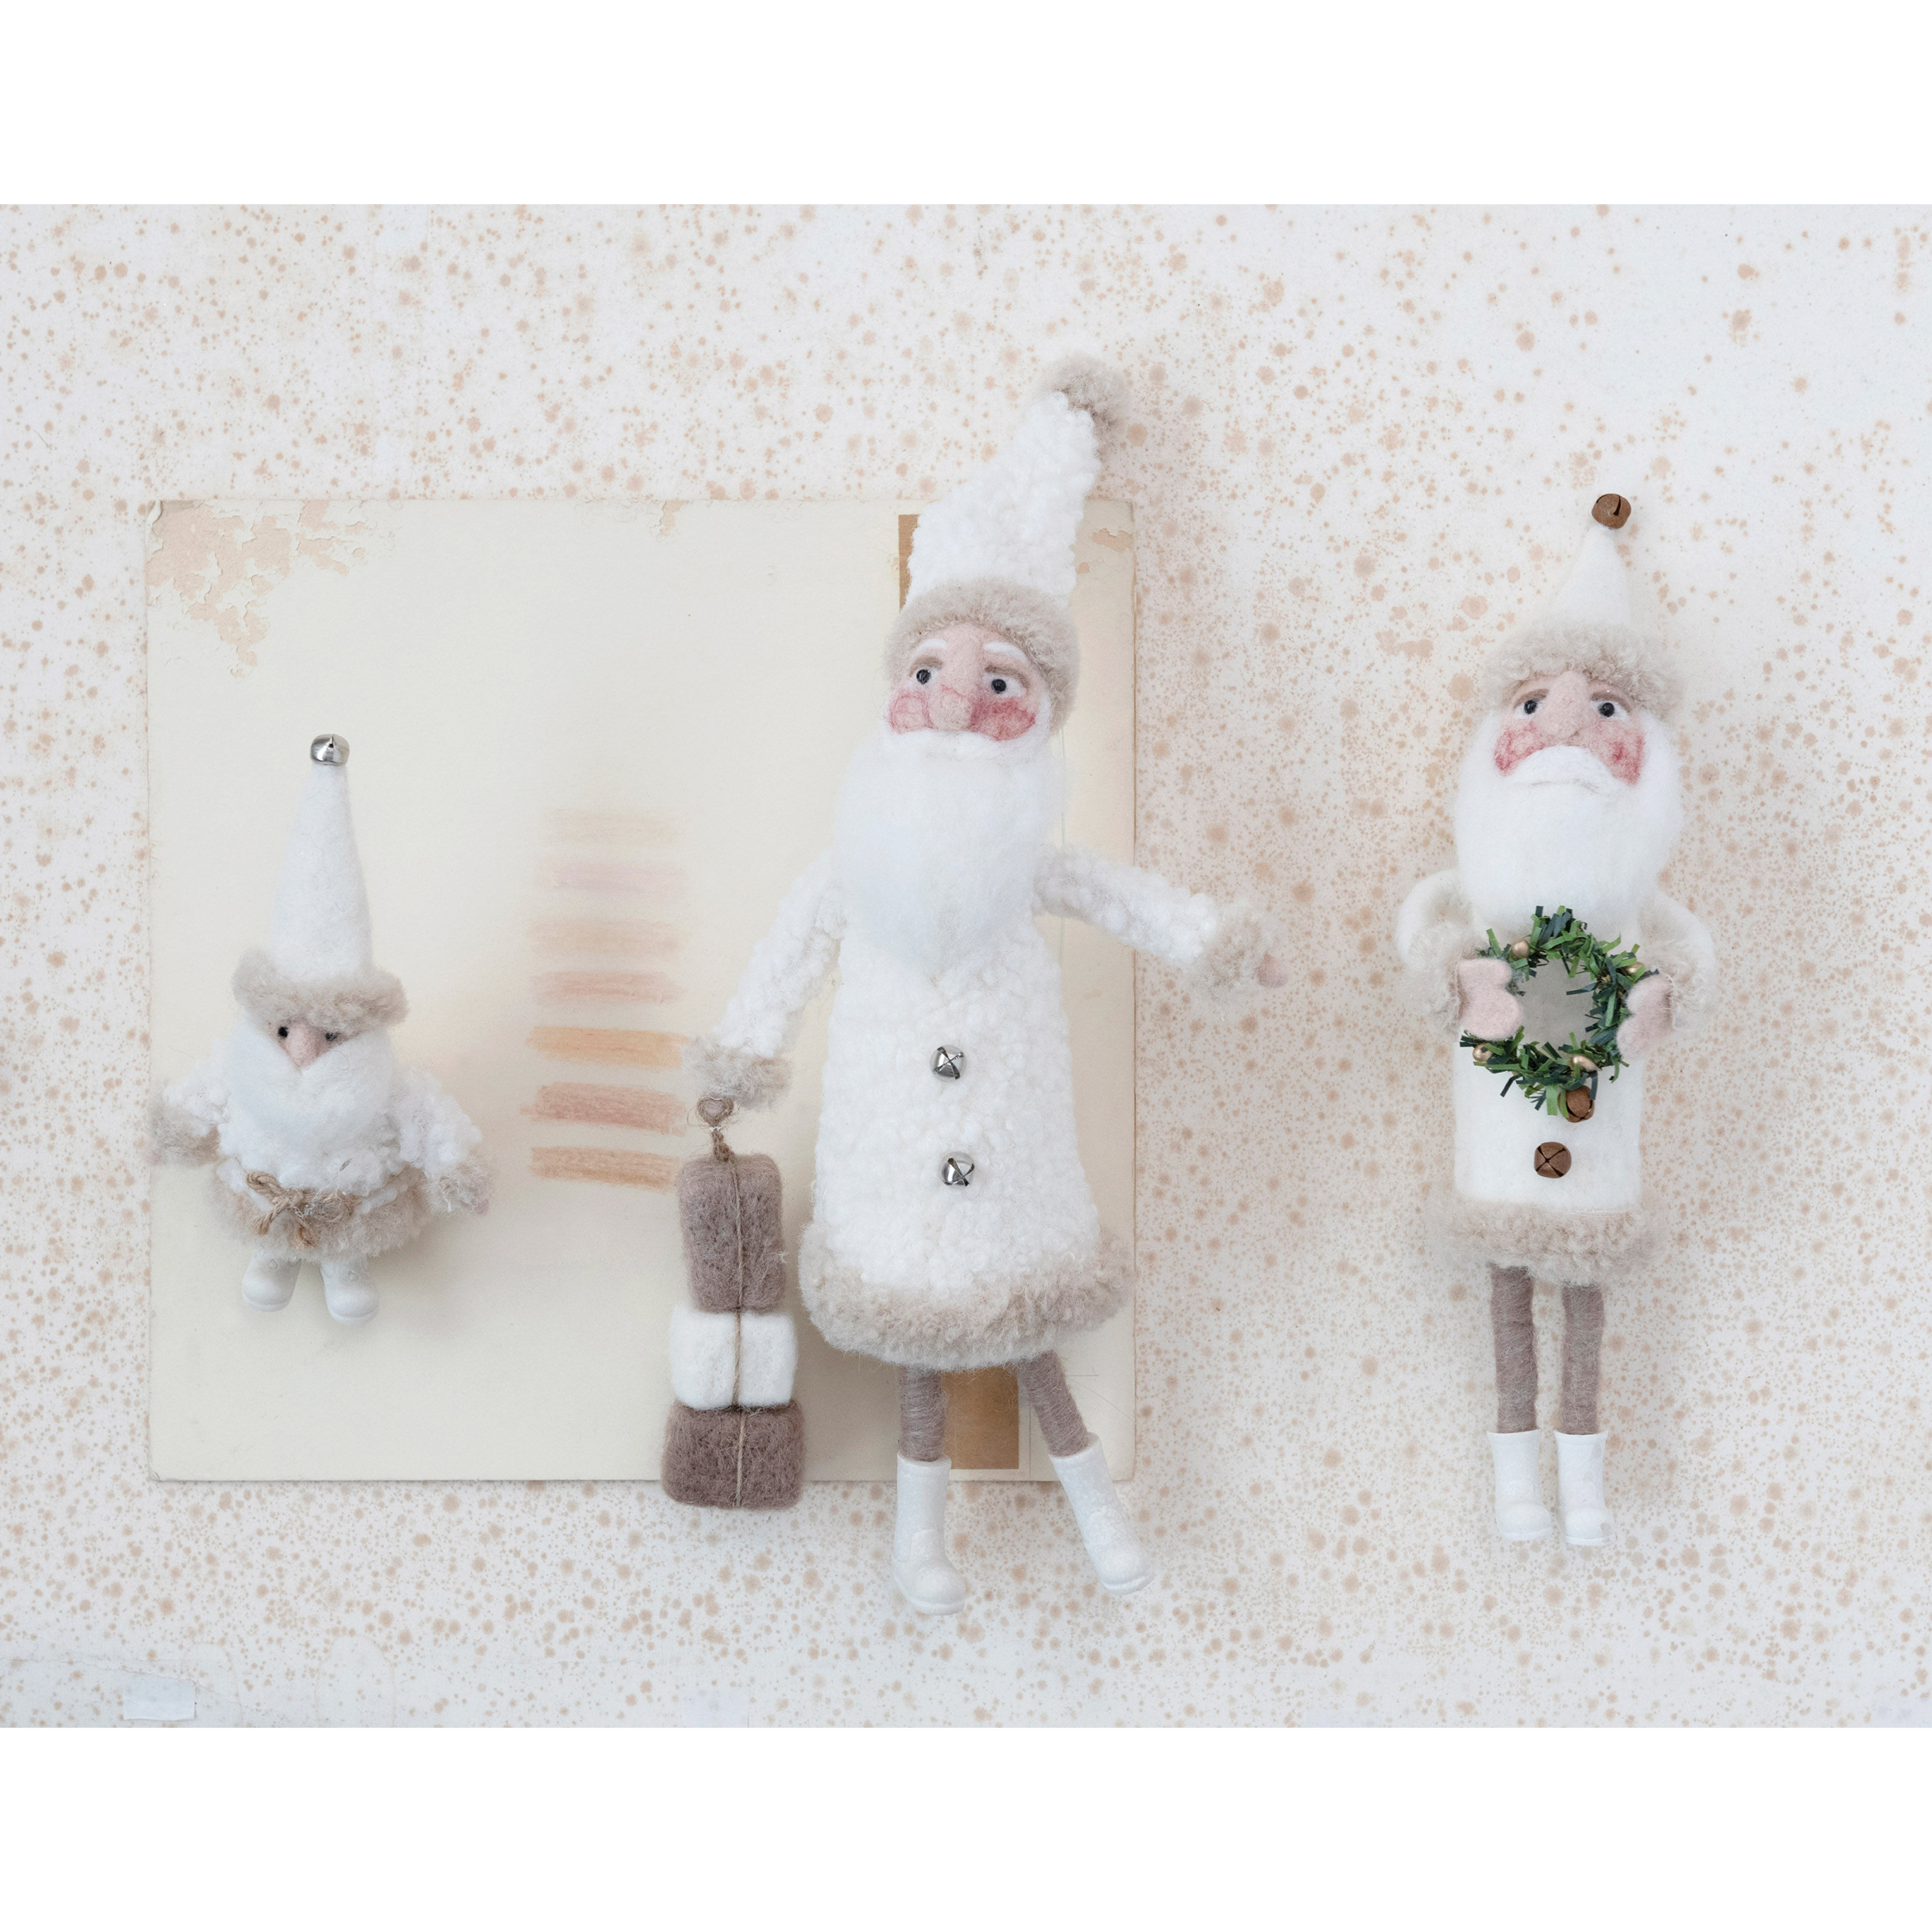 Creative Co-op Hand-Painted Santa Ornaments Boxed